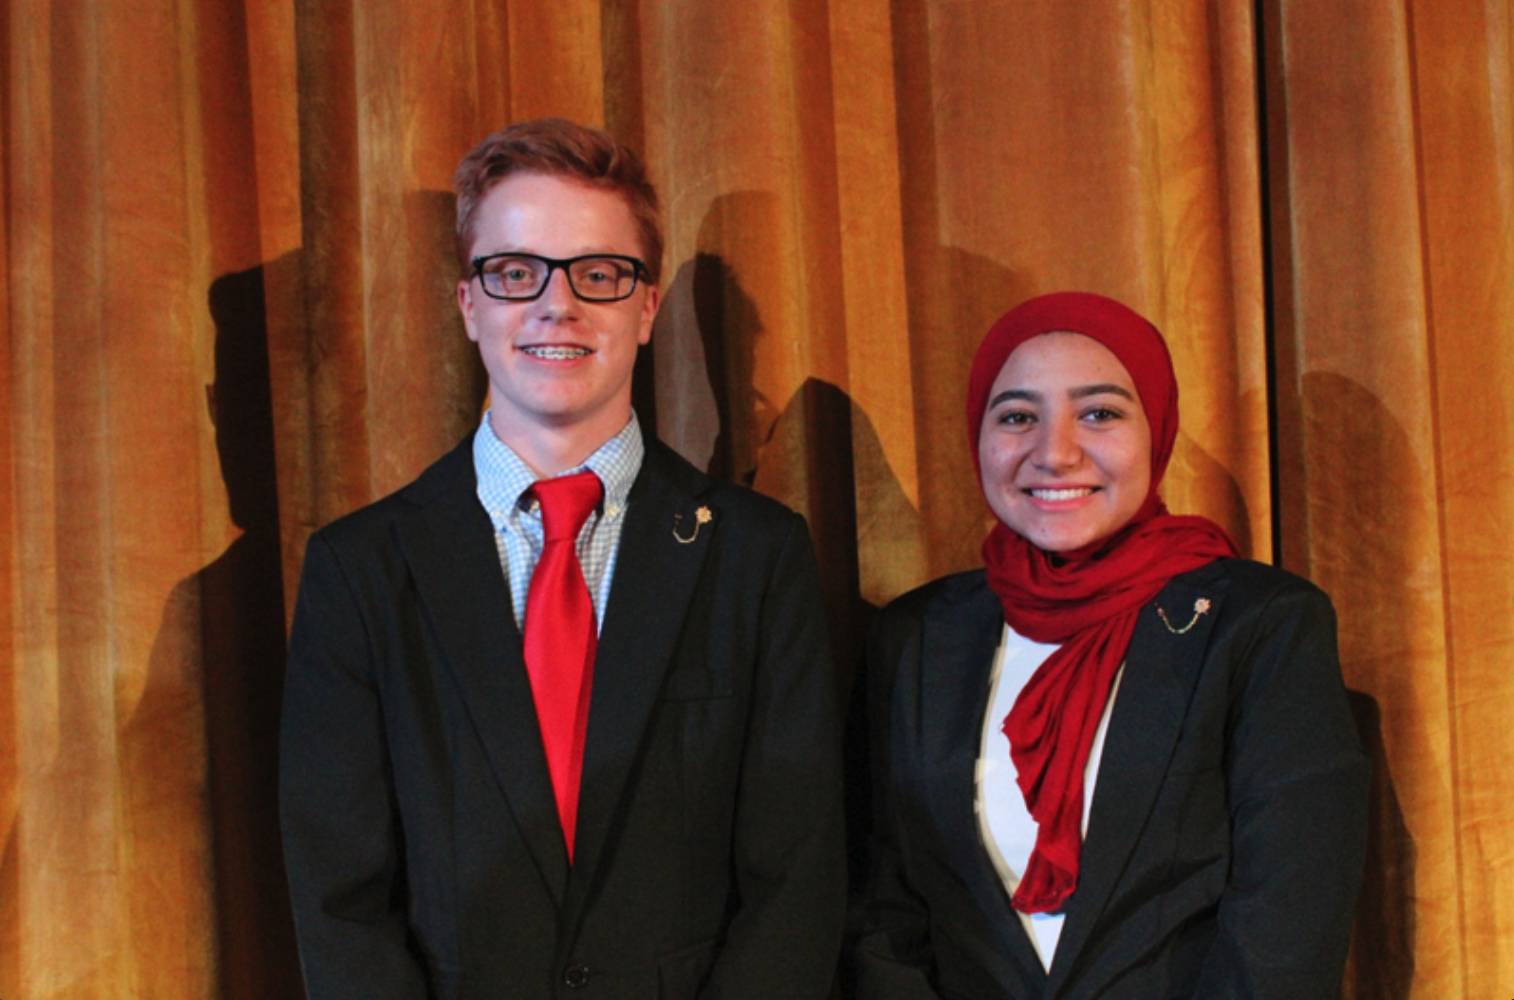 Ethan Valentino and Yasmeen Galal: Student Body President and Vice President